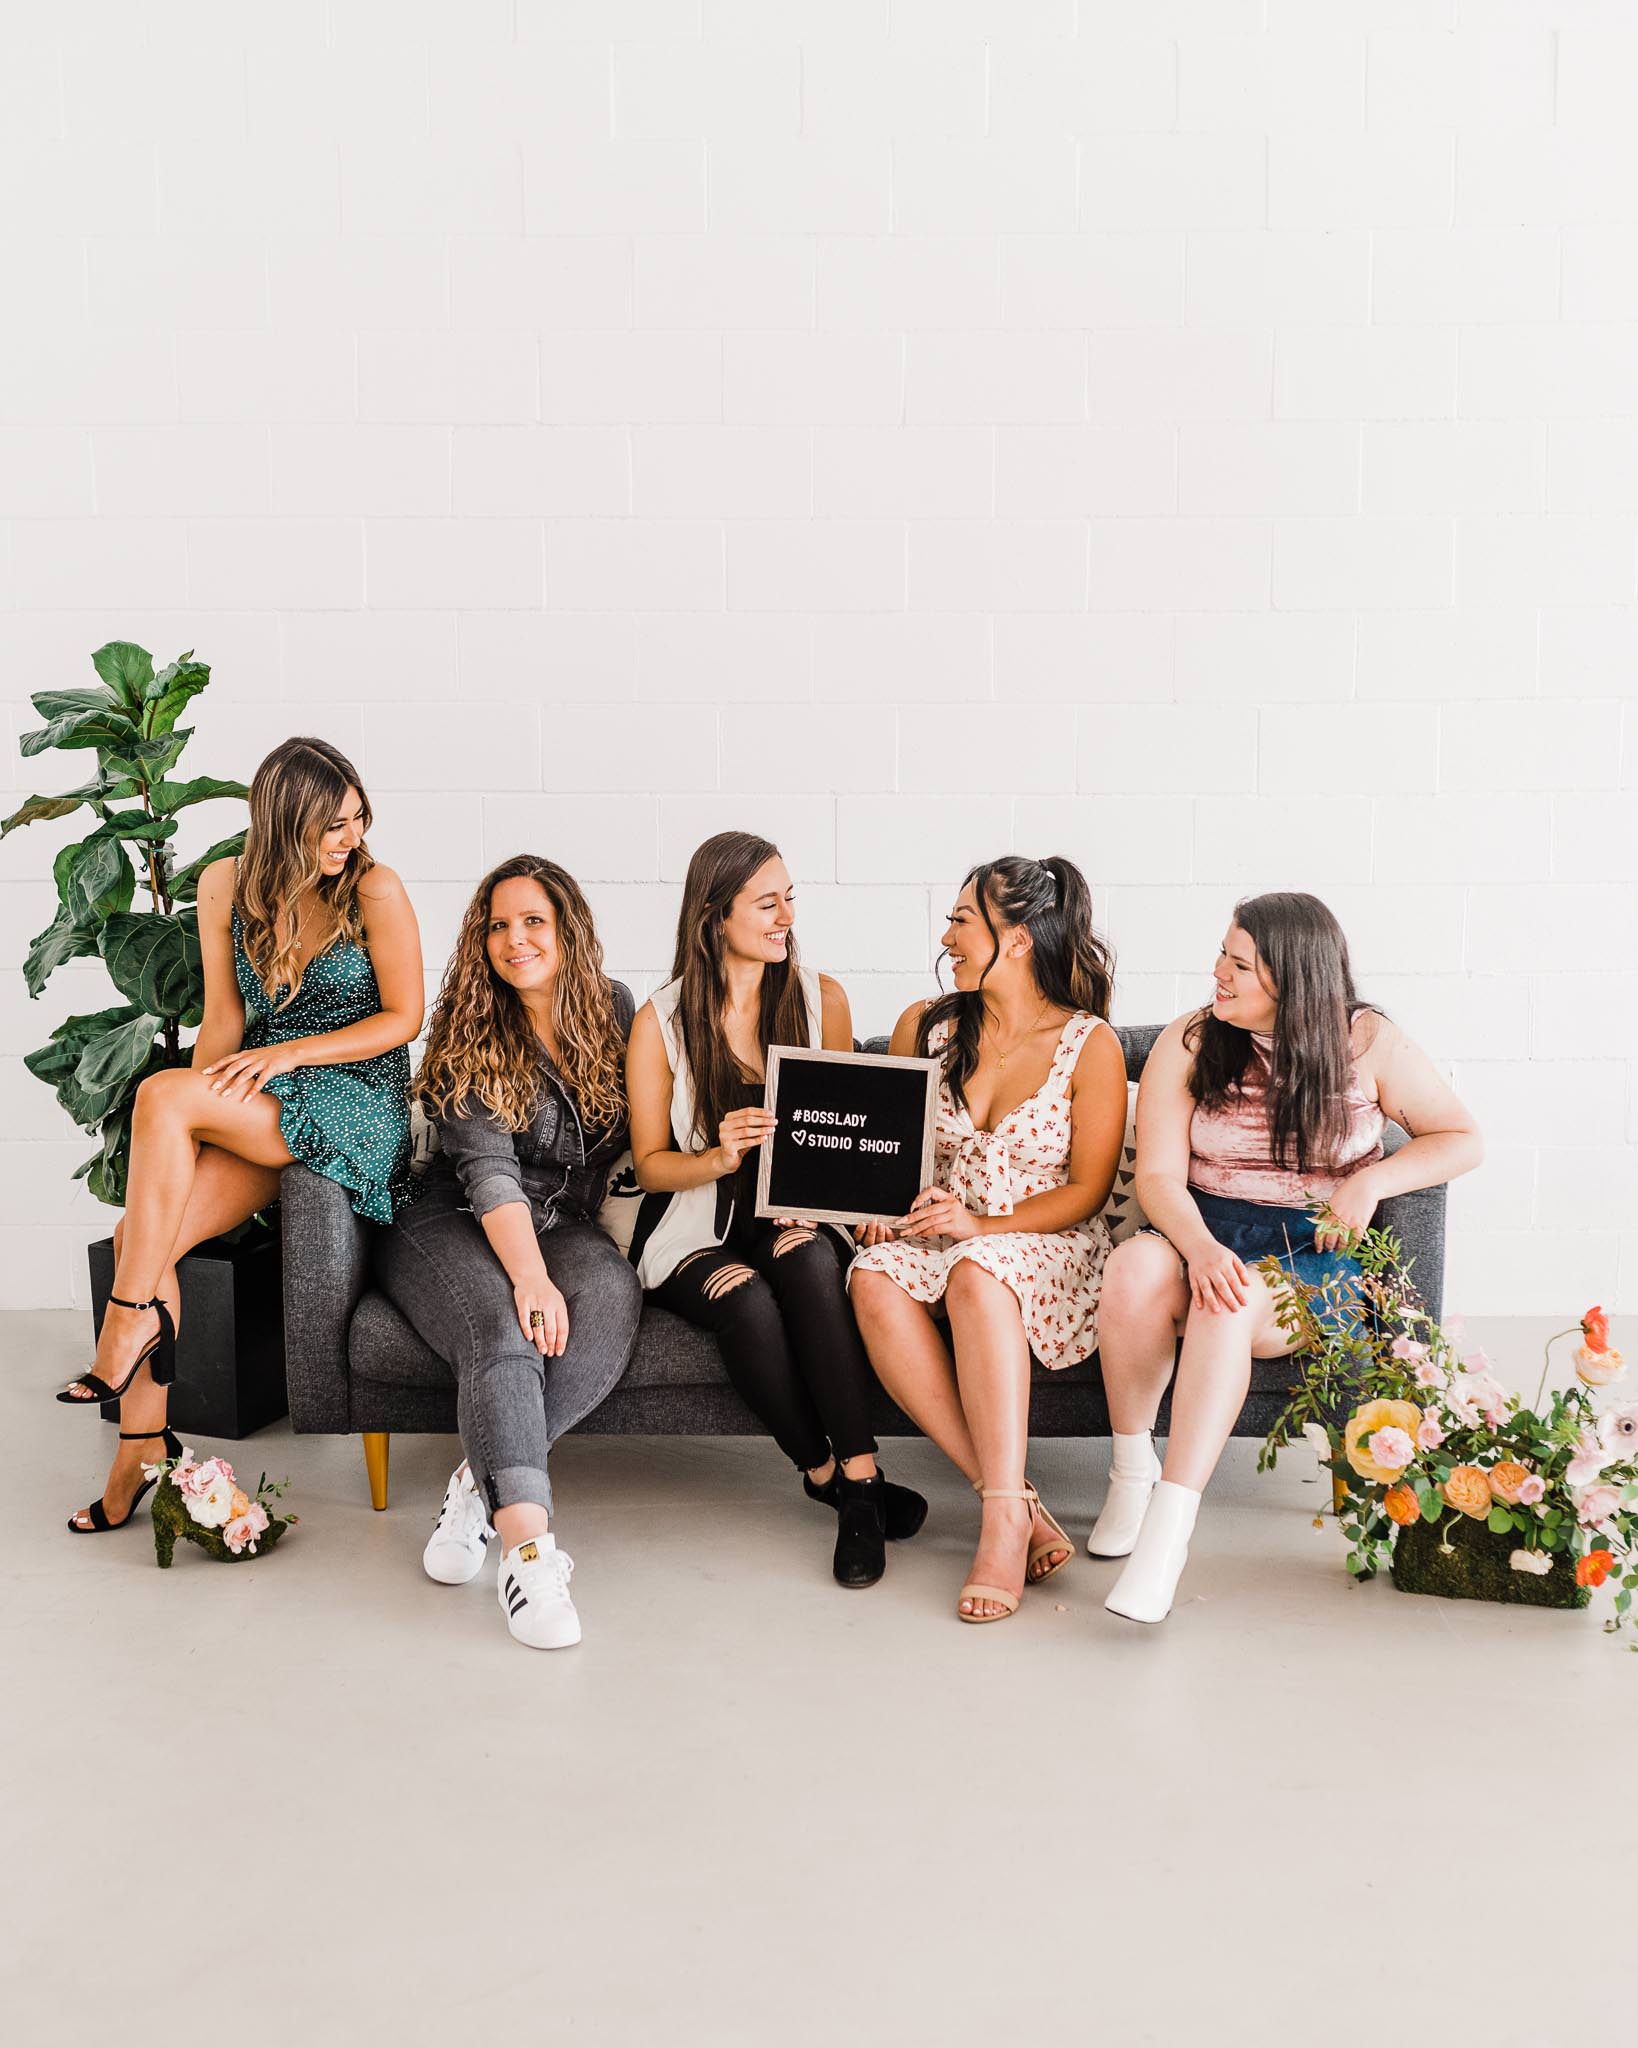 5 women sitting on a couch with plants on both sides. Two women in the middle are holding a sign that says "#BossLady studio shoot."